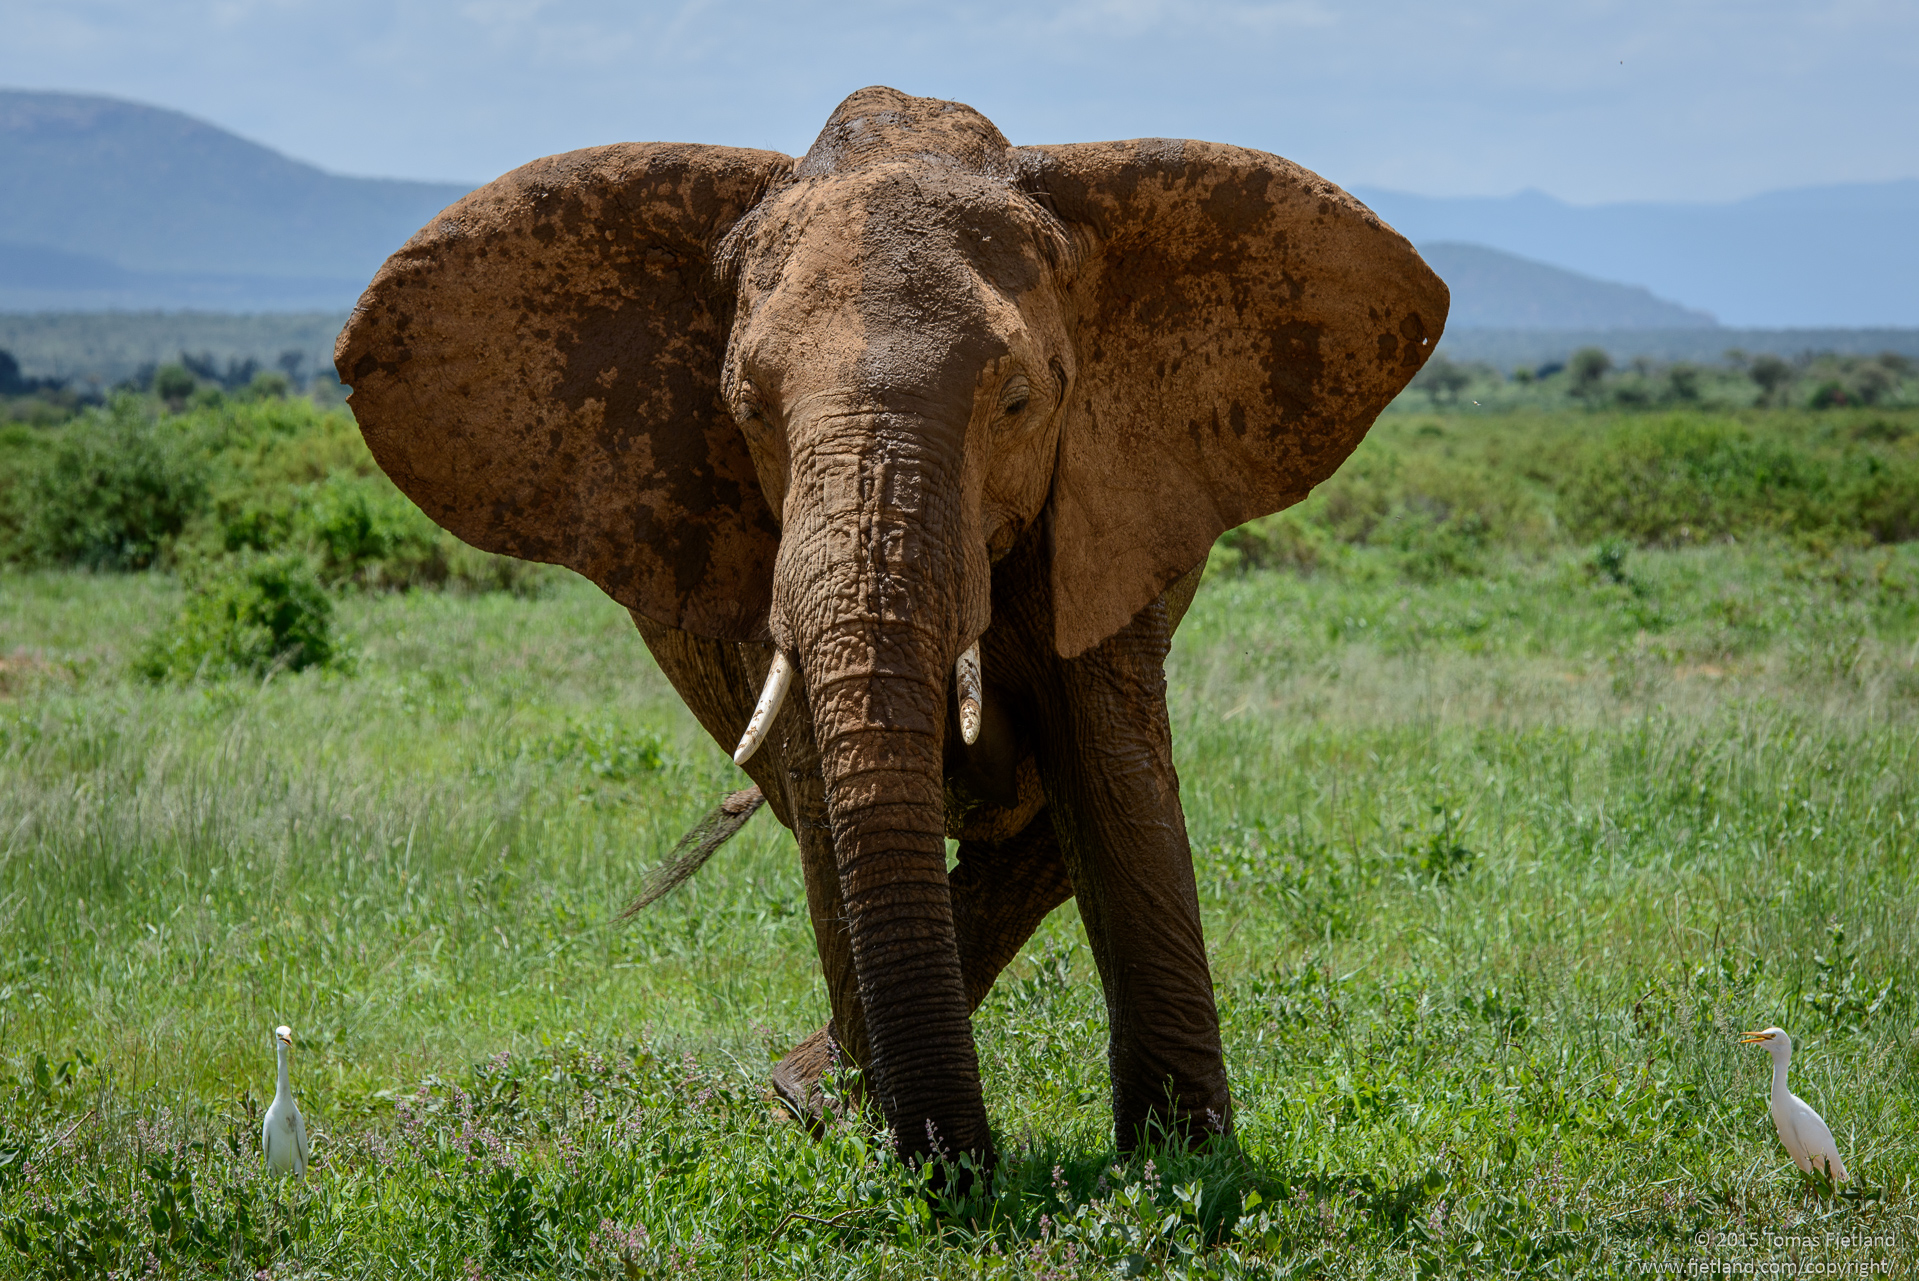 Despite the magnificently versatile trunk, elephants still struggle with getting rid of parasites and bugs